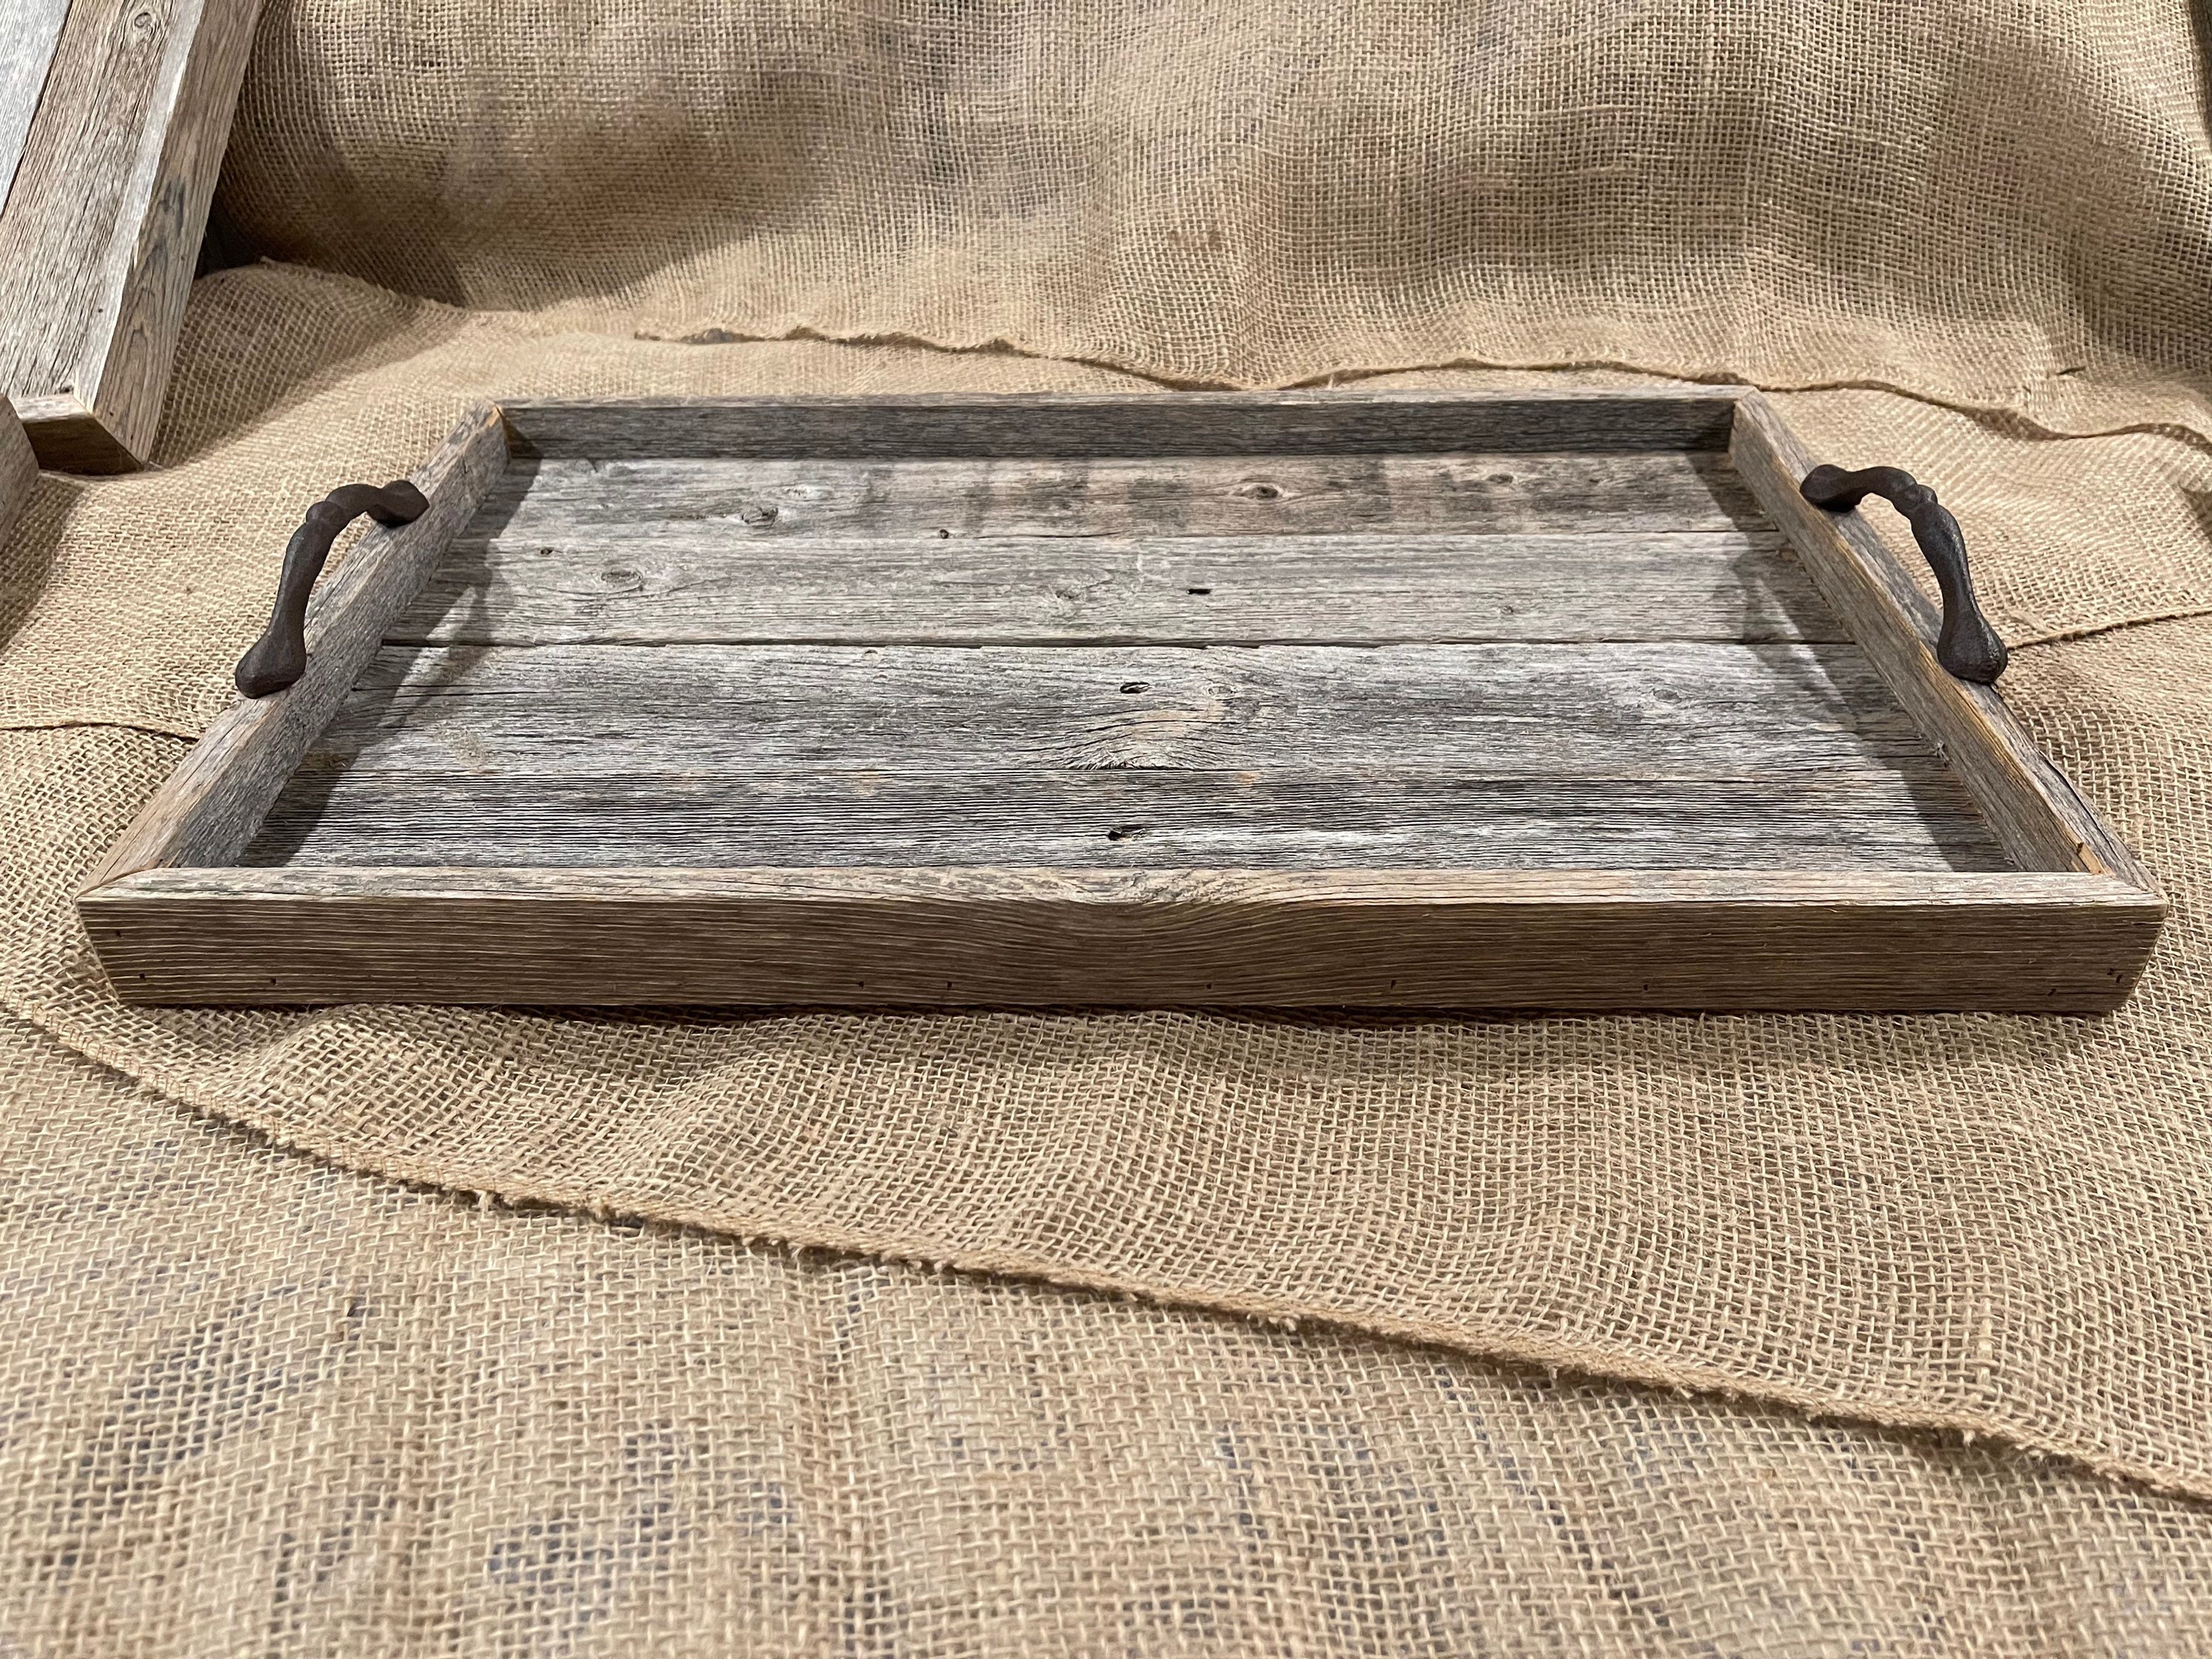 Decorative Tray, Barn Wood Serving Tray, Table Tray, Kitchen Decor, Gift,  Handpainted, Reclaimed, Chickadee, Distressed Upcycled Wood 